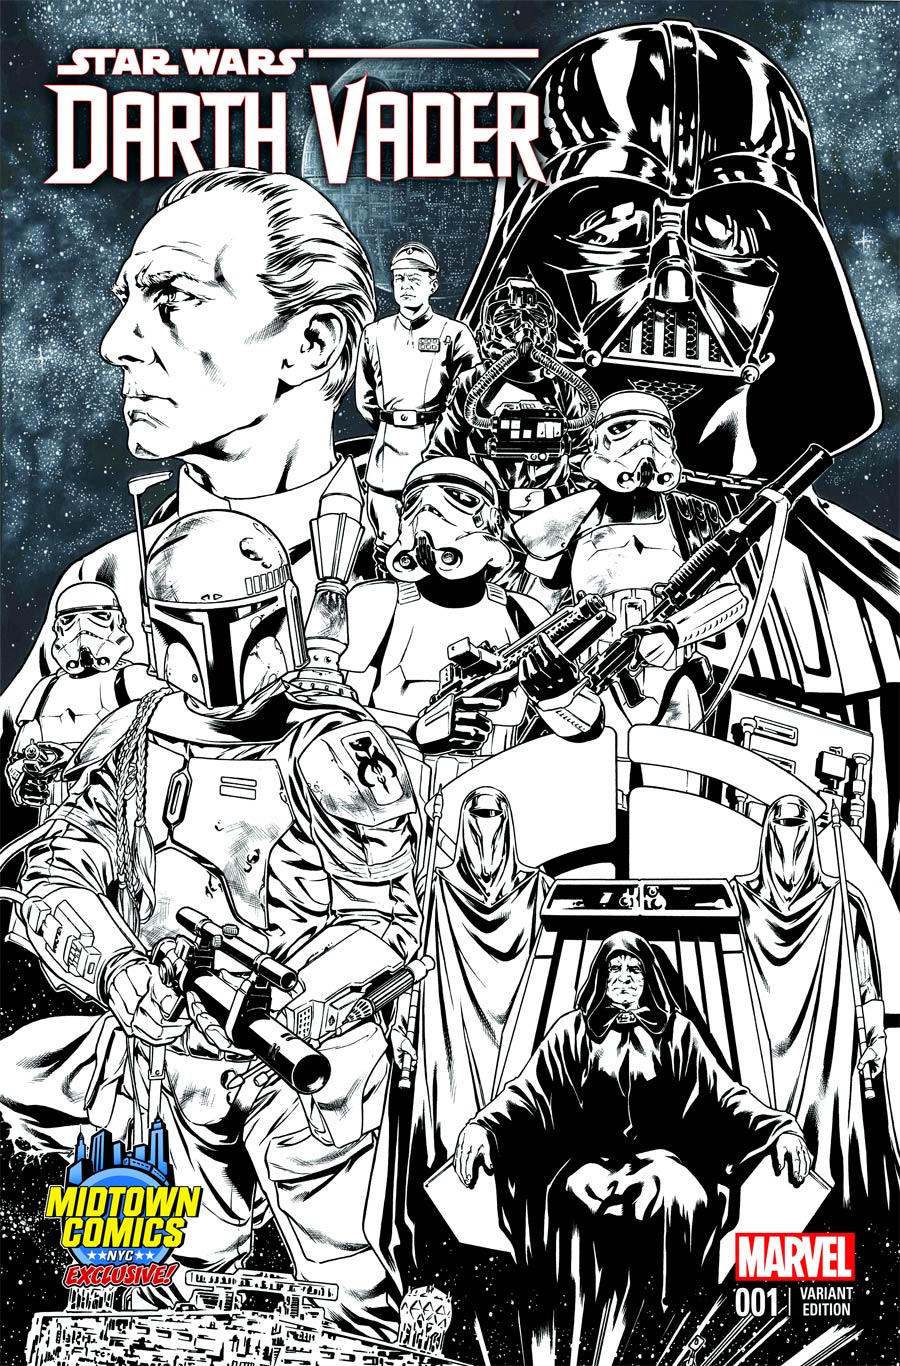 Darth Vader #1 (Mark Brooks Midtown Comics Connecting Sketch Variant Cover 2) (11.02.2015)